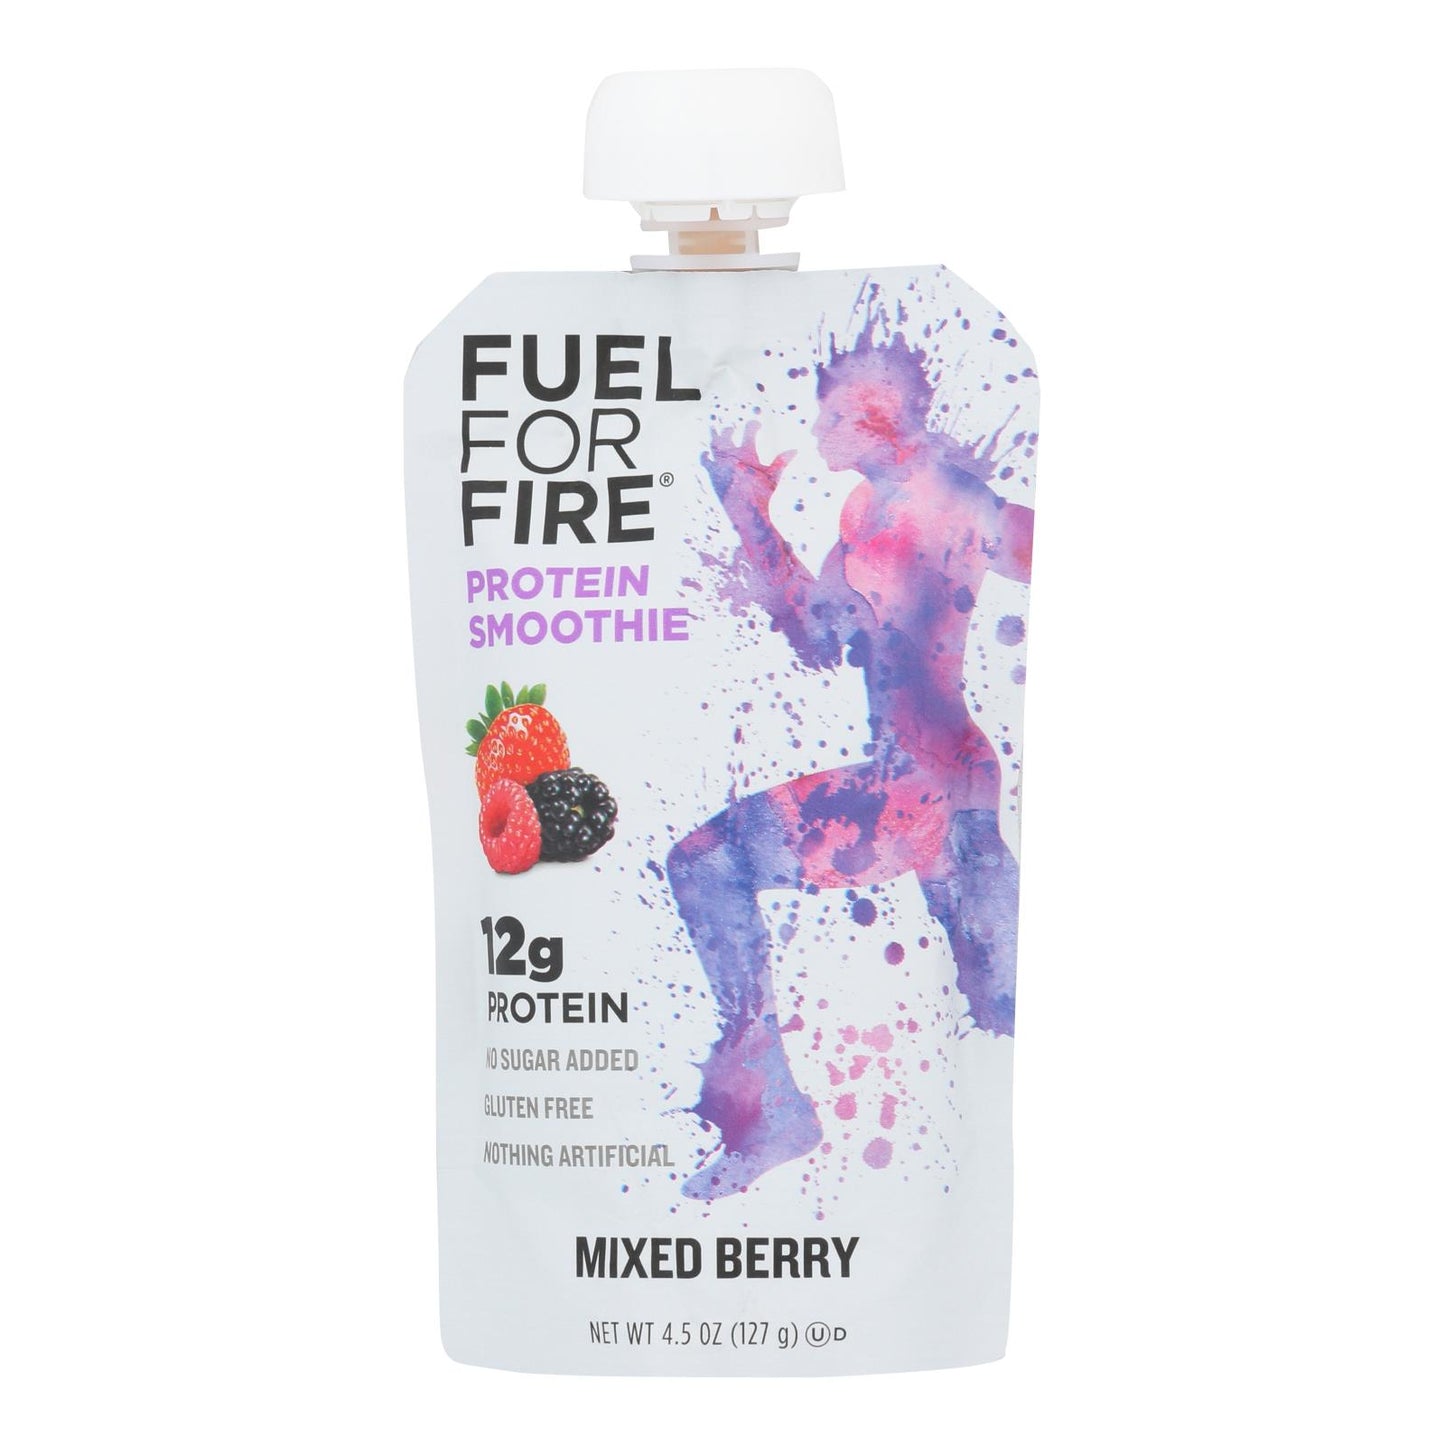 Fuel For Fire Mixed Berry Protein Smoothie, Mixed Berry - Case Of 12 - 4.5 Oz